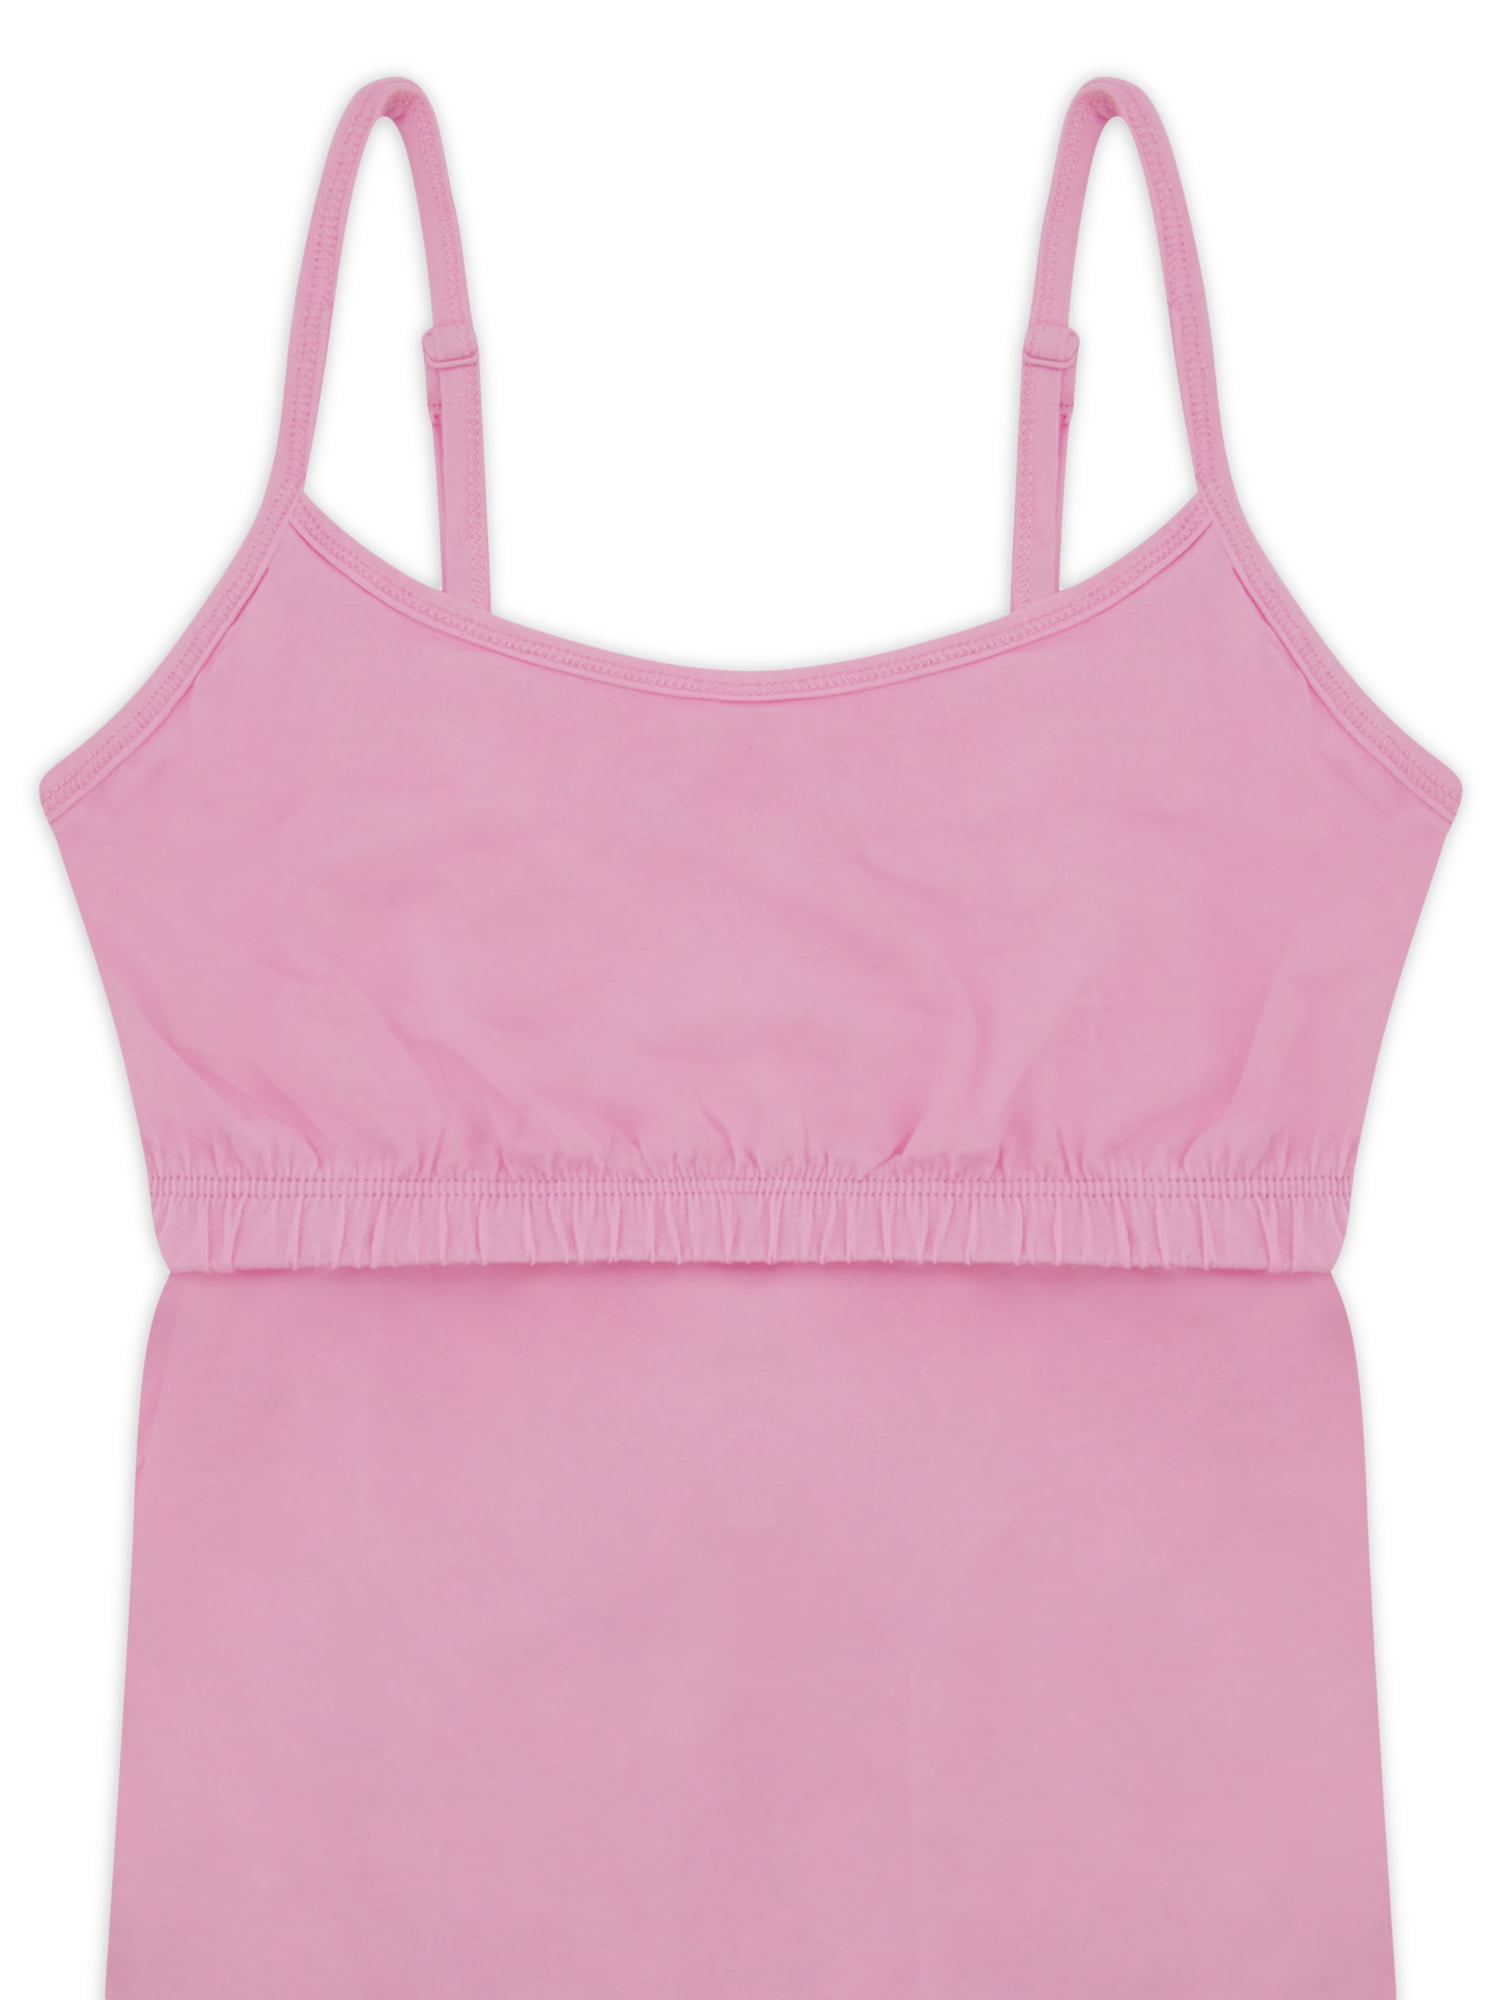 Buy Lashapear Womens Modal Camisole Built in Shelf Bra Padded Tank Top  Solid Color Yoga Tanks Tops, Pink, XXXL（US 16-18） at